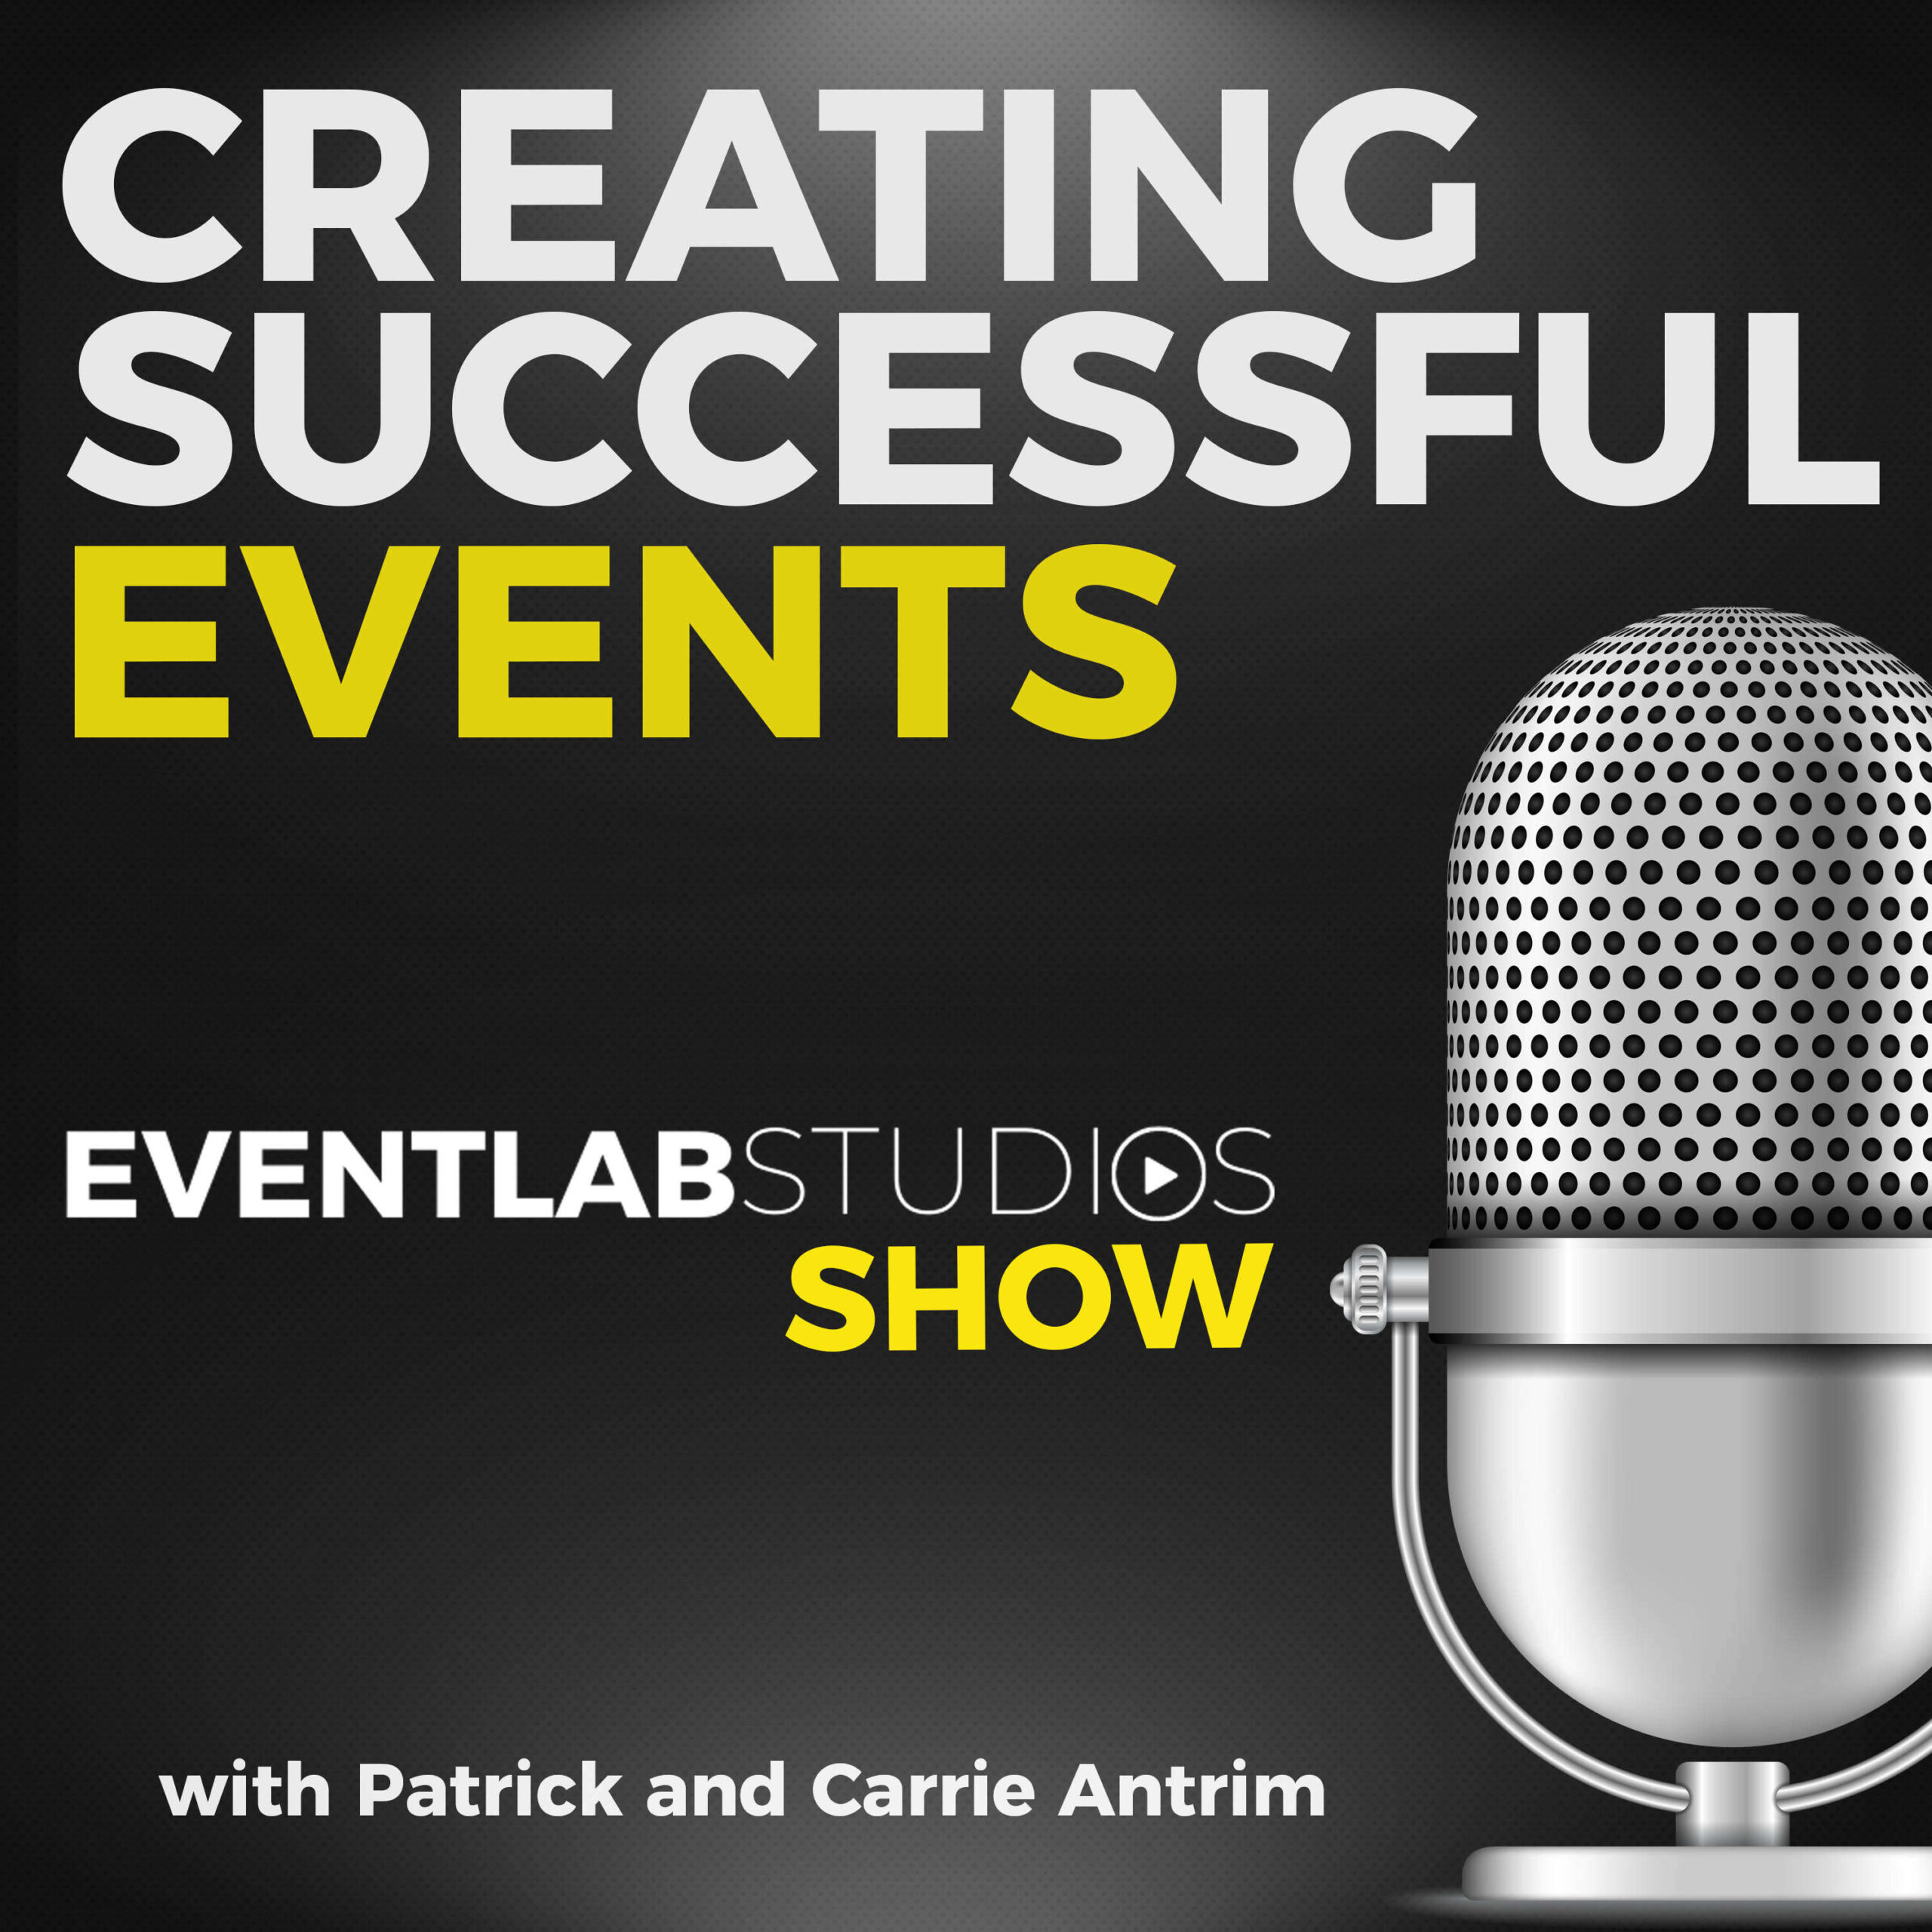 Introduction to Creating Successful Events